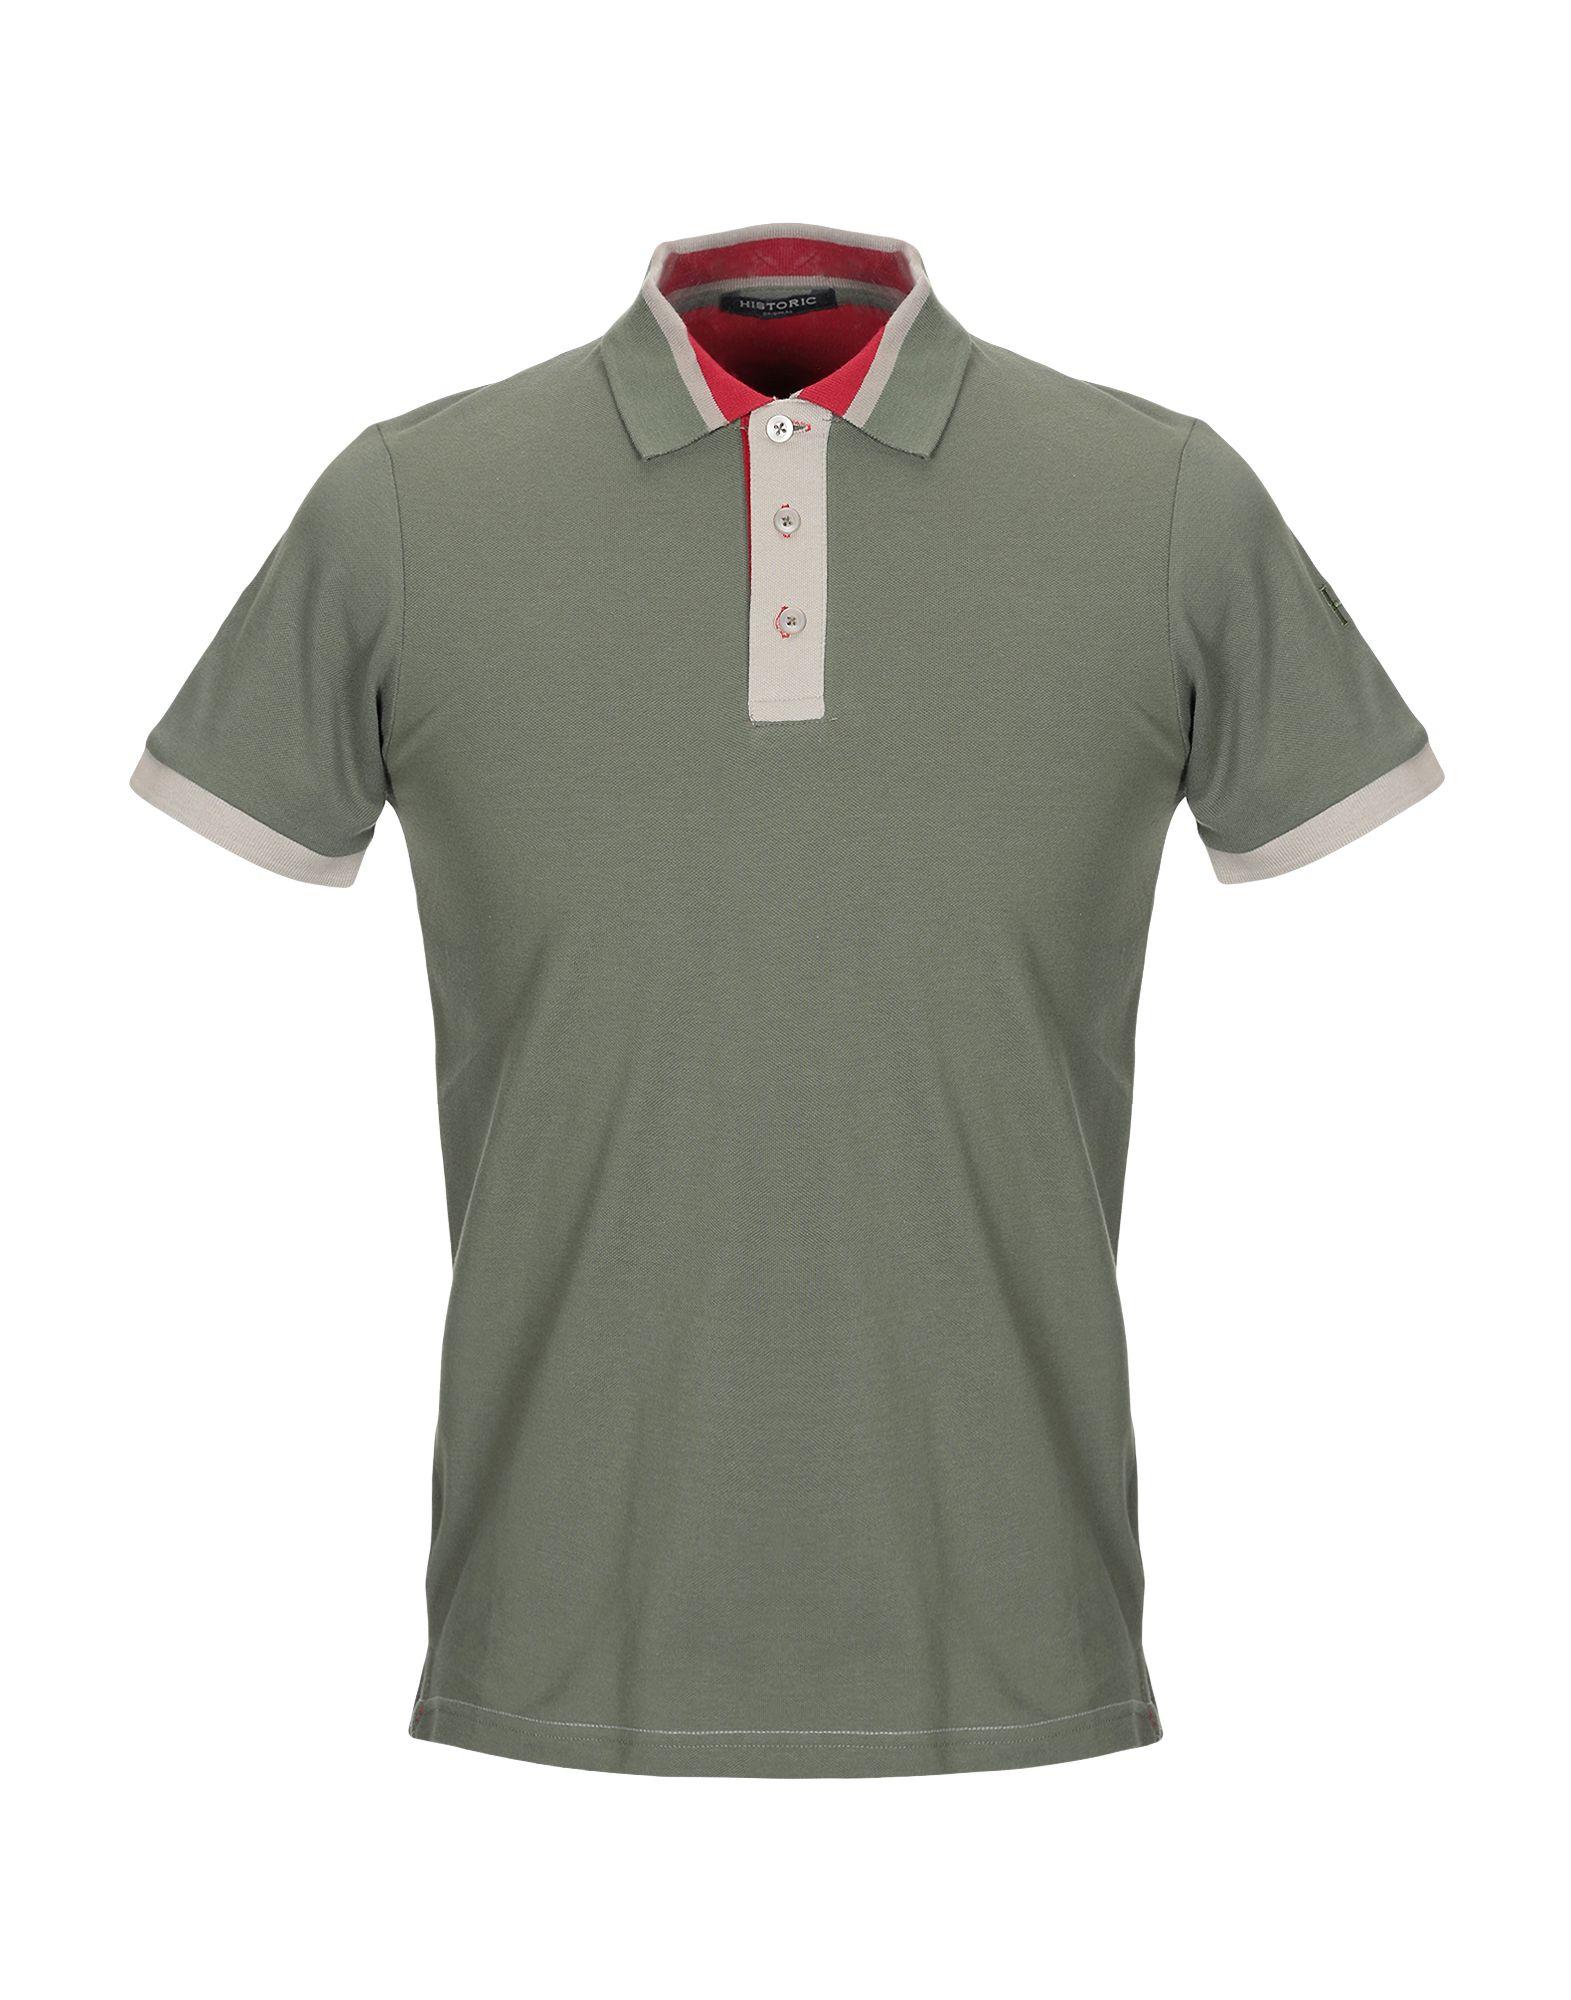 Historic Cotton Polo Shirt in Military Green (Green) for Men - Lyst